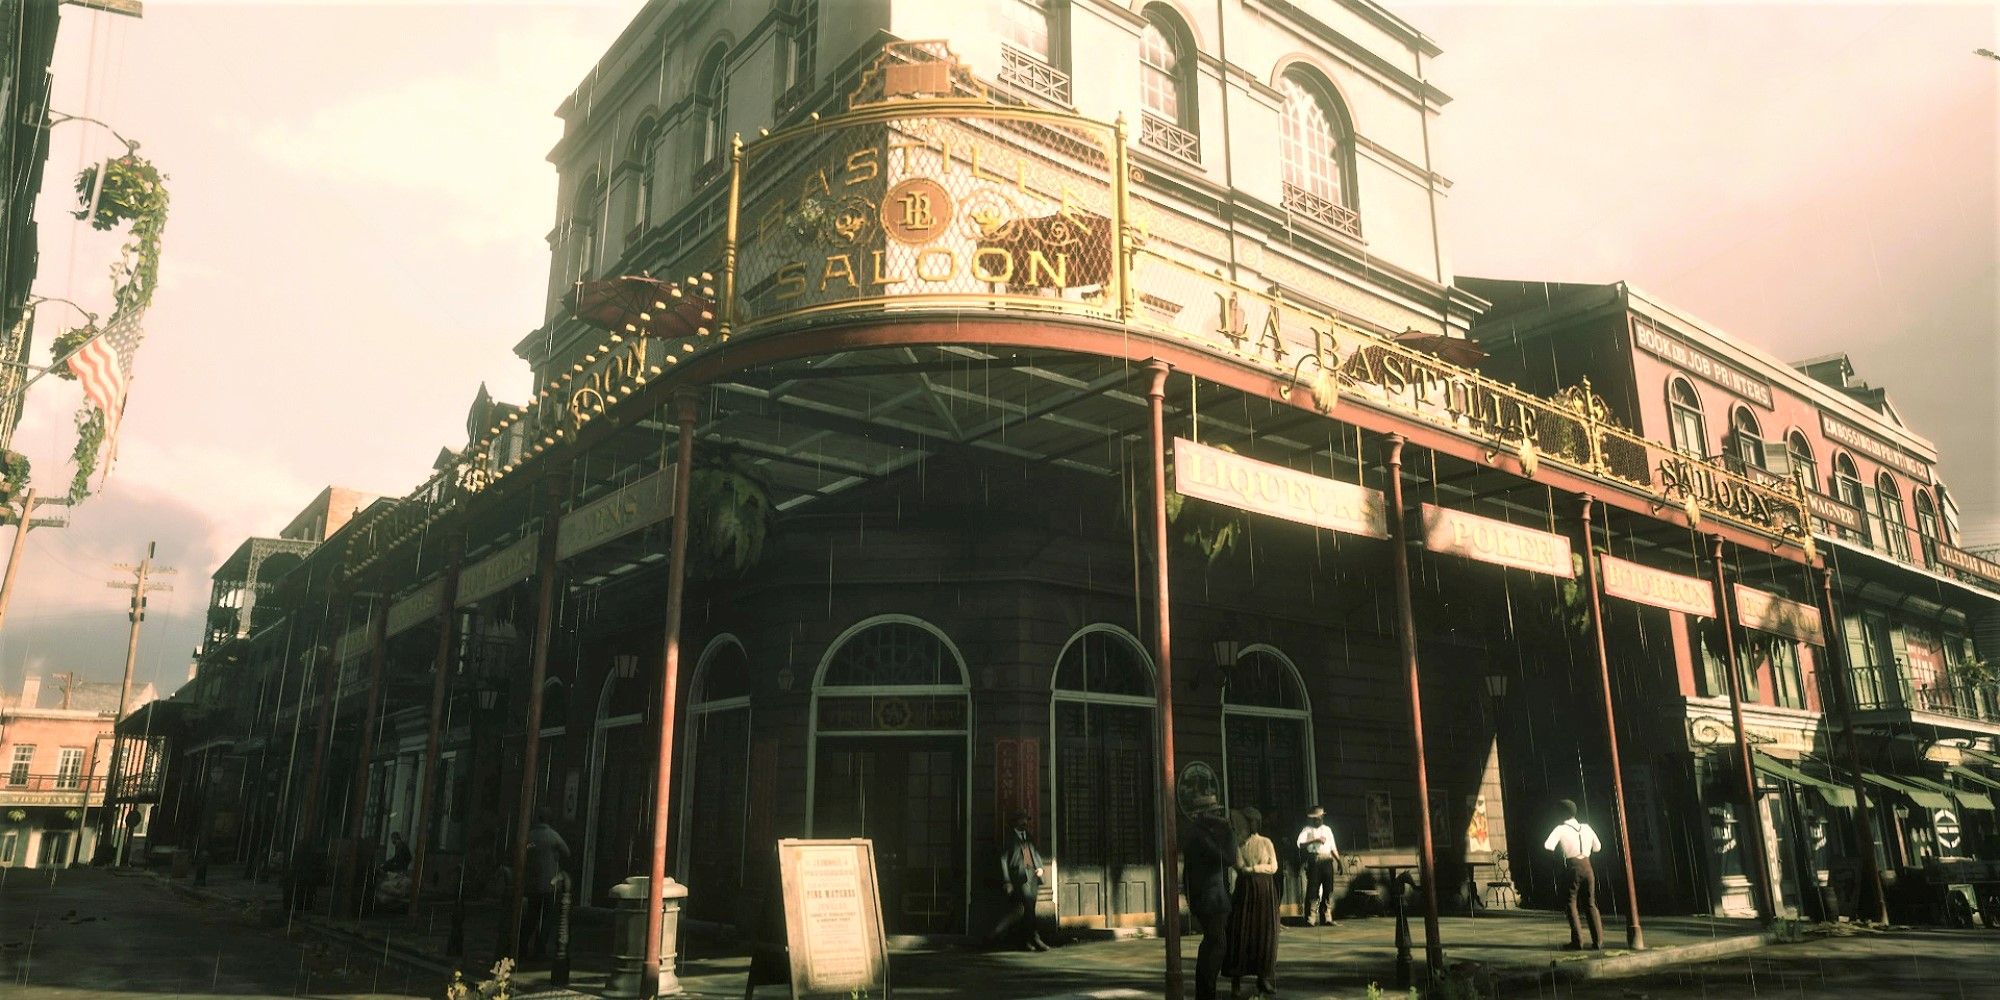 An image of the saloon in the city of Saint Denis from Red Dead Redemption 2